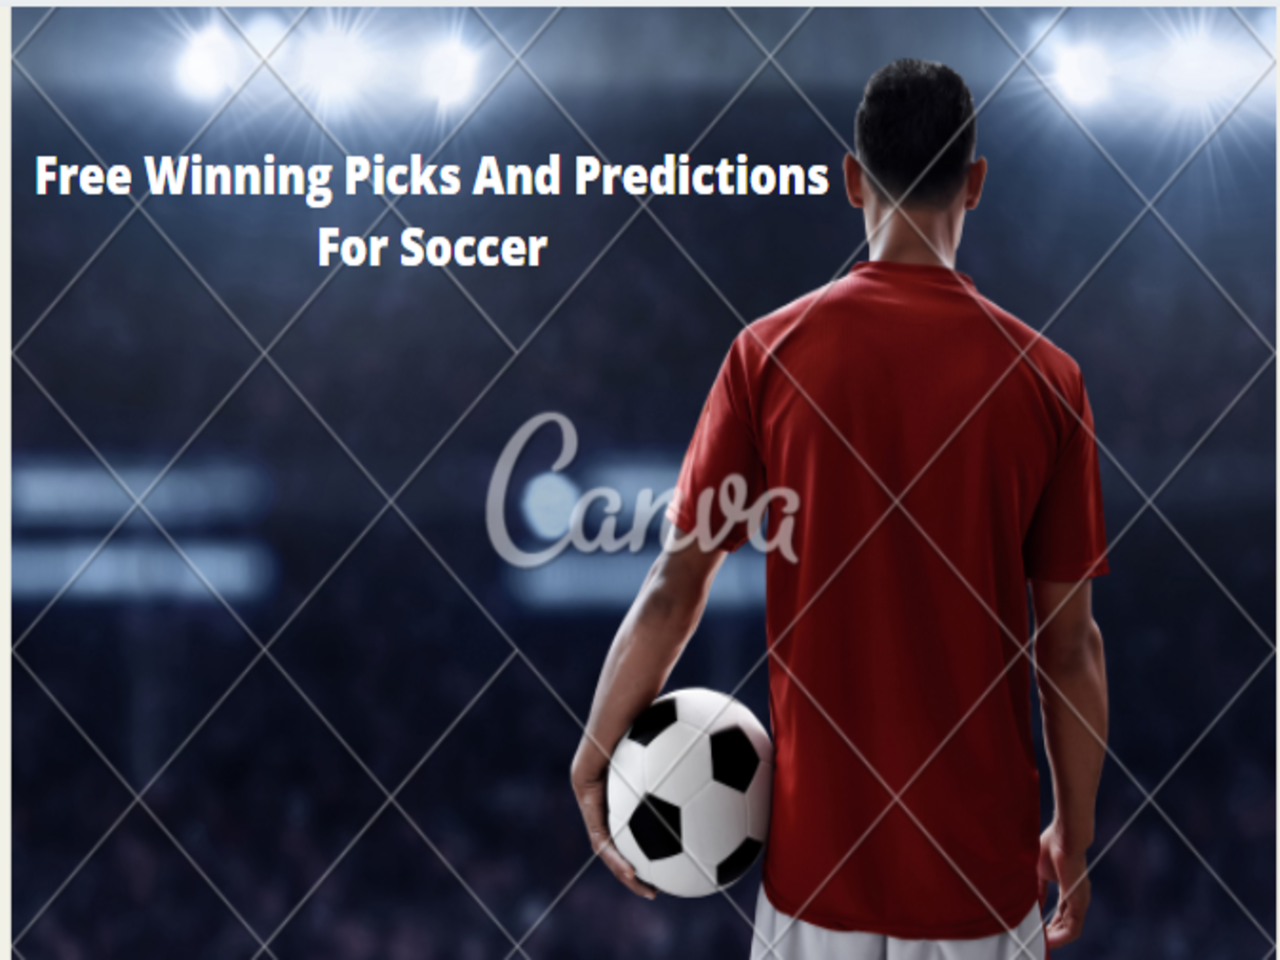 Free Winning Picks And Predictions For Soccer